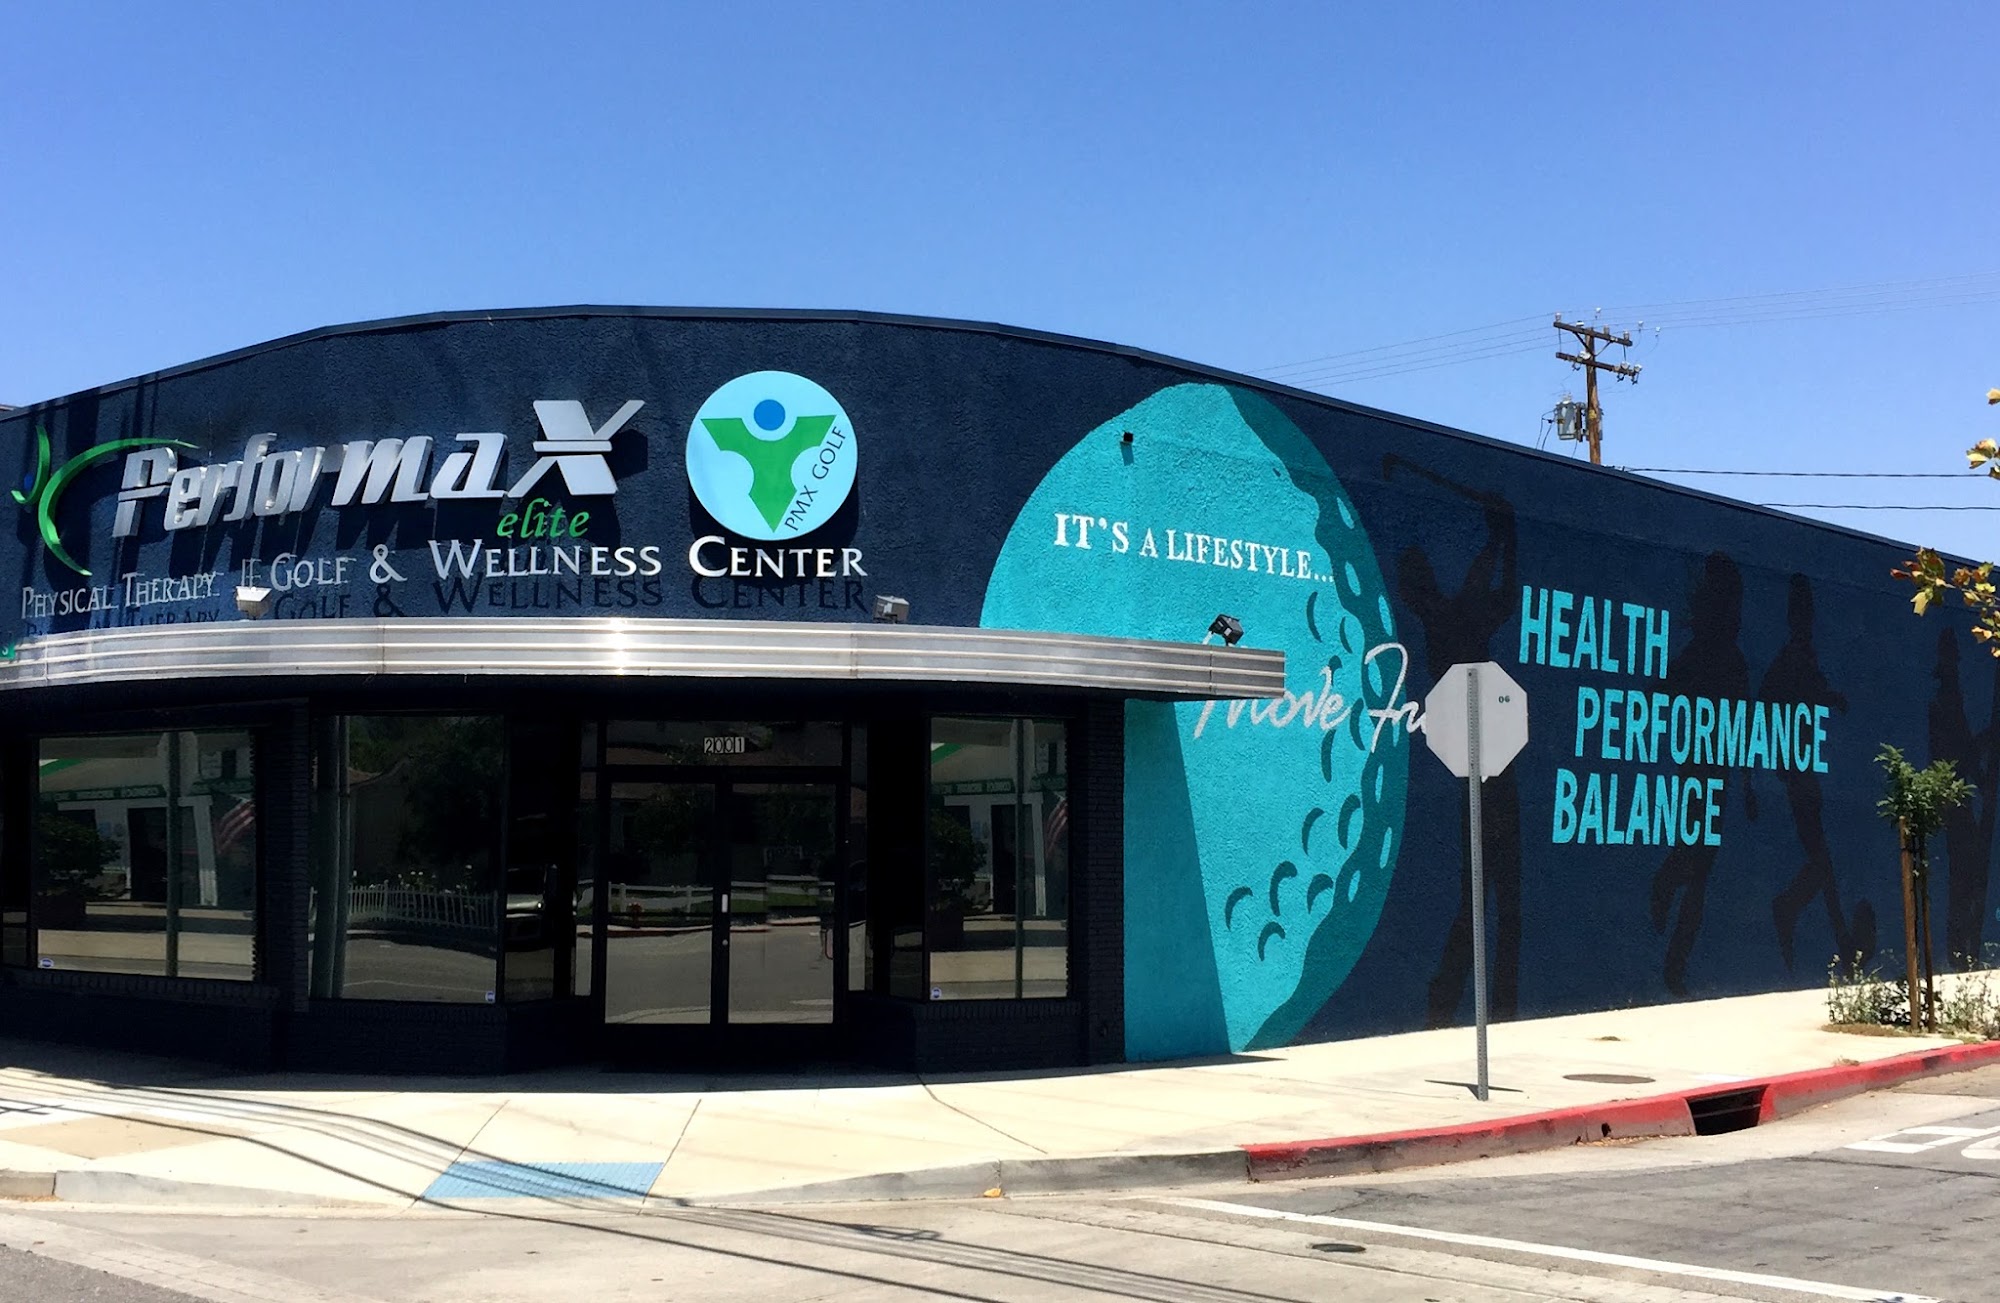 PerformaX Physical Therapy - Golf & Wellness Center